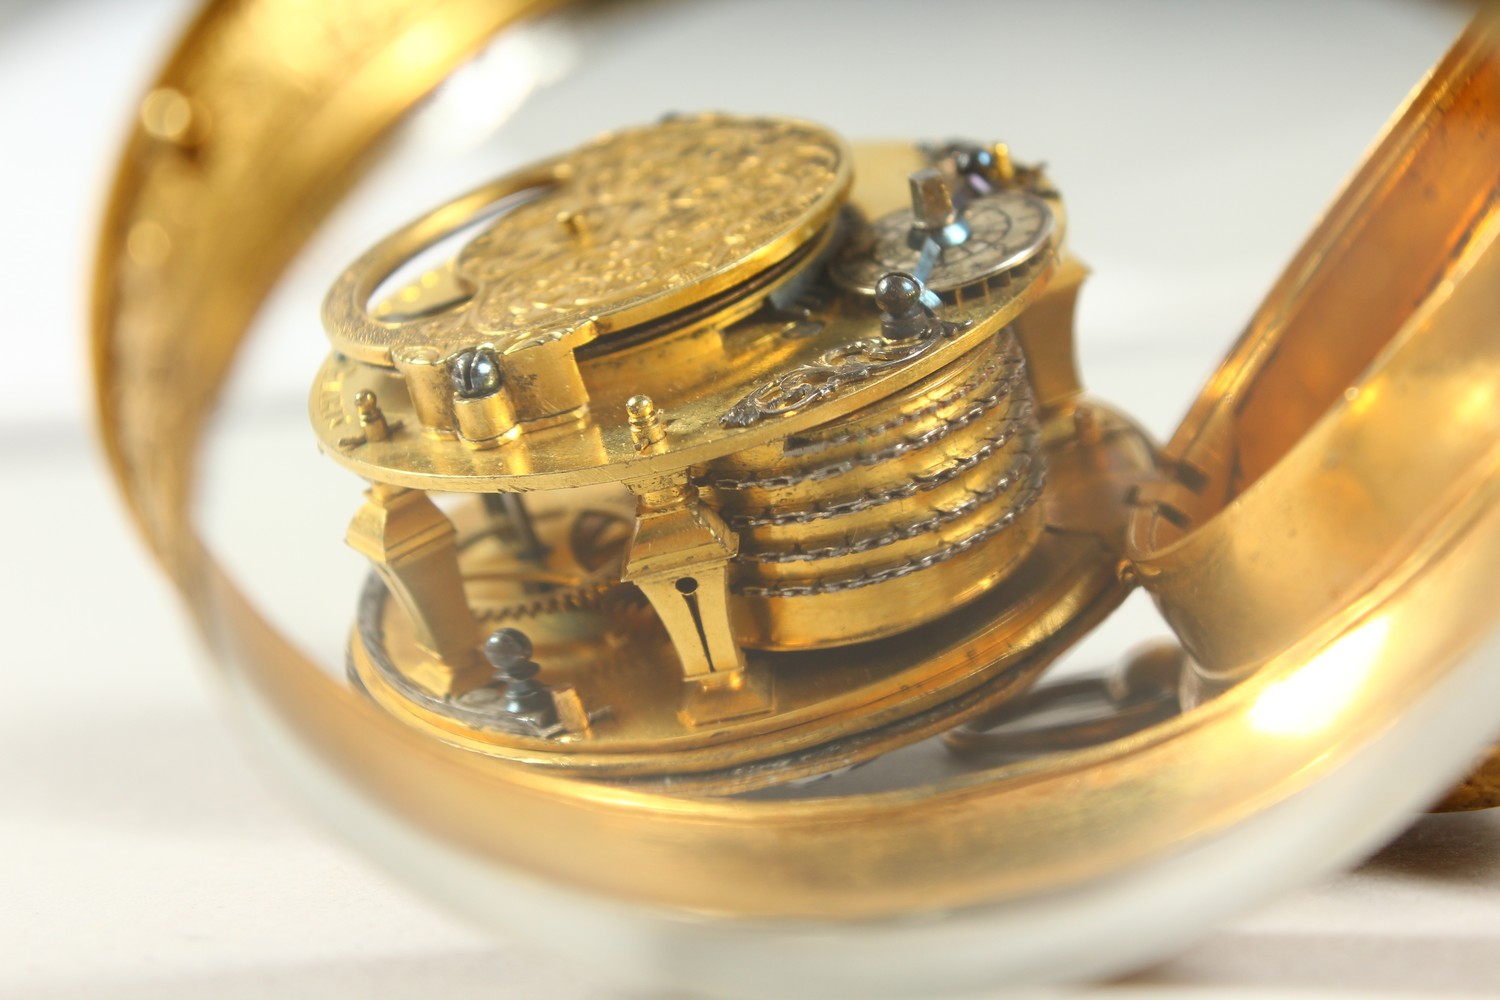 A VERY GOOD EARLY 18TH CENTURY FRENCH ONION WATCH by JOLLY, PARIS, with verge movement, the face - Image 9 of 11